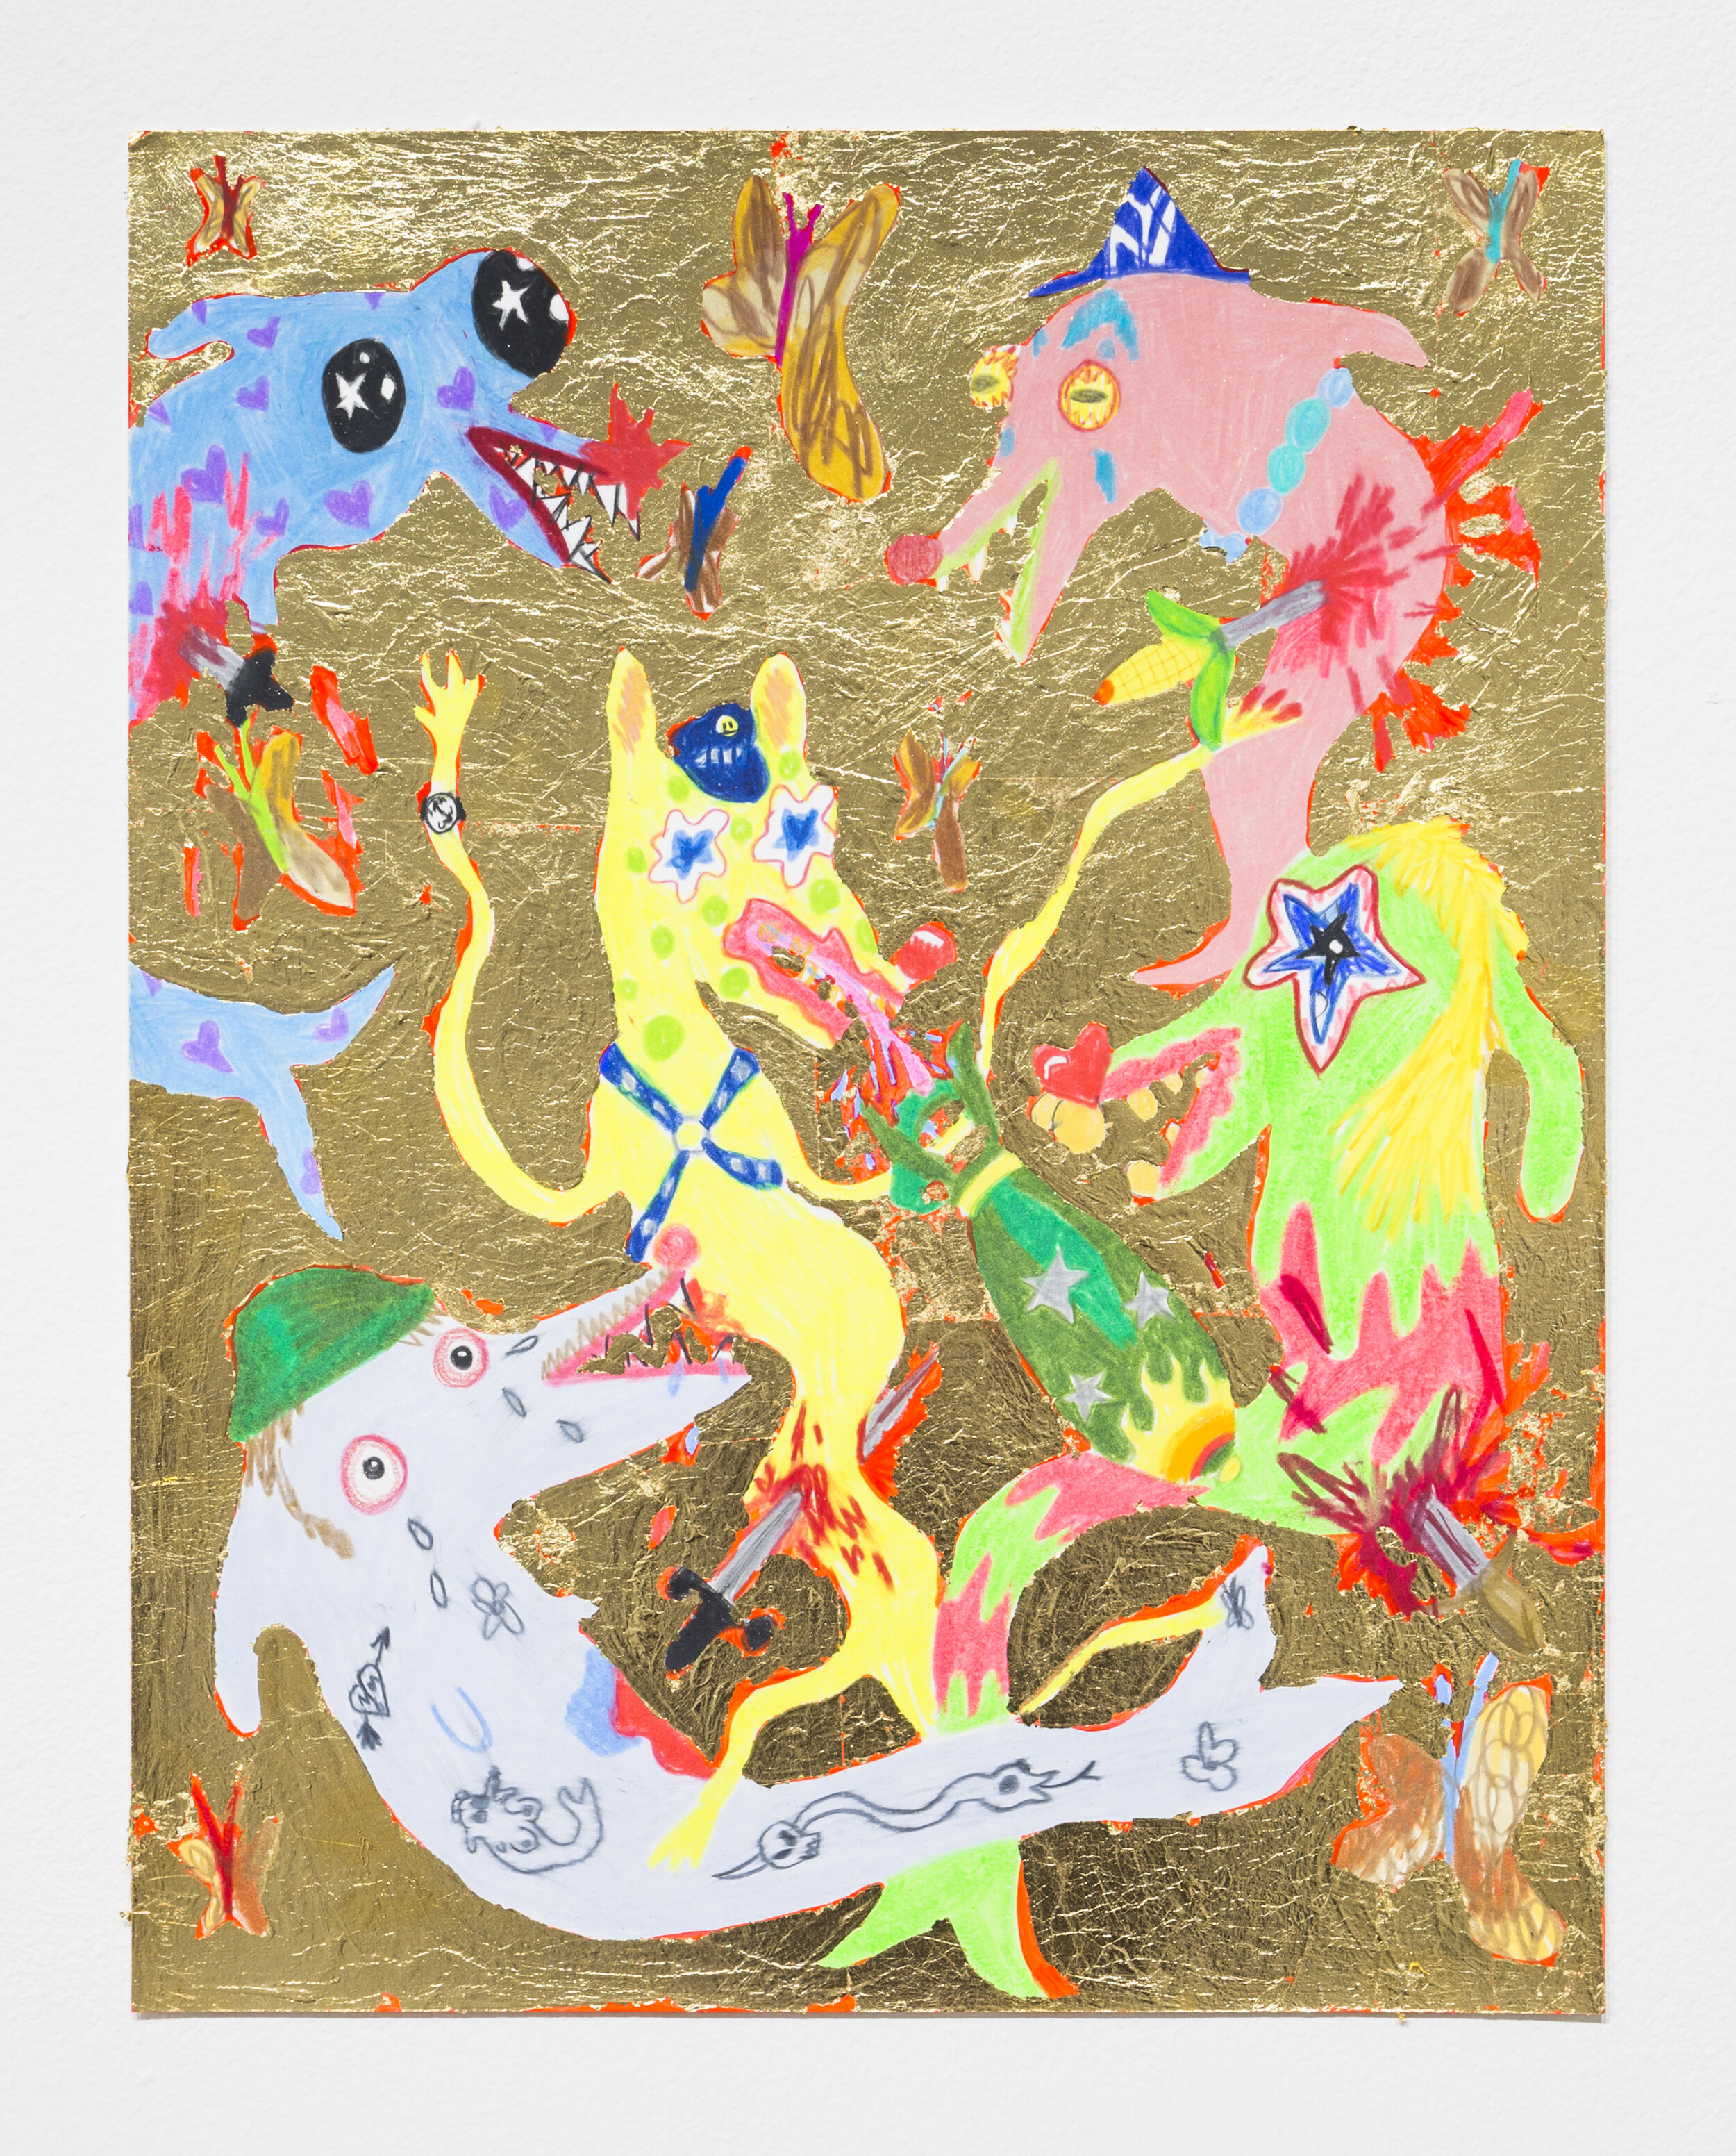   Bobby Dolphin and His Friends,  2018  14 x 11 inches (35.56 x 27.94 cm.)  Colored pencil, acrylic paint, and gold leaf on paper  Private collection, Washington, DC 